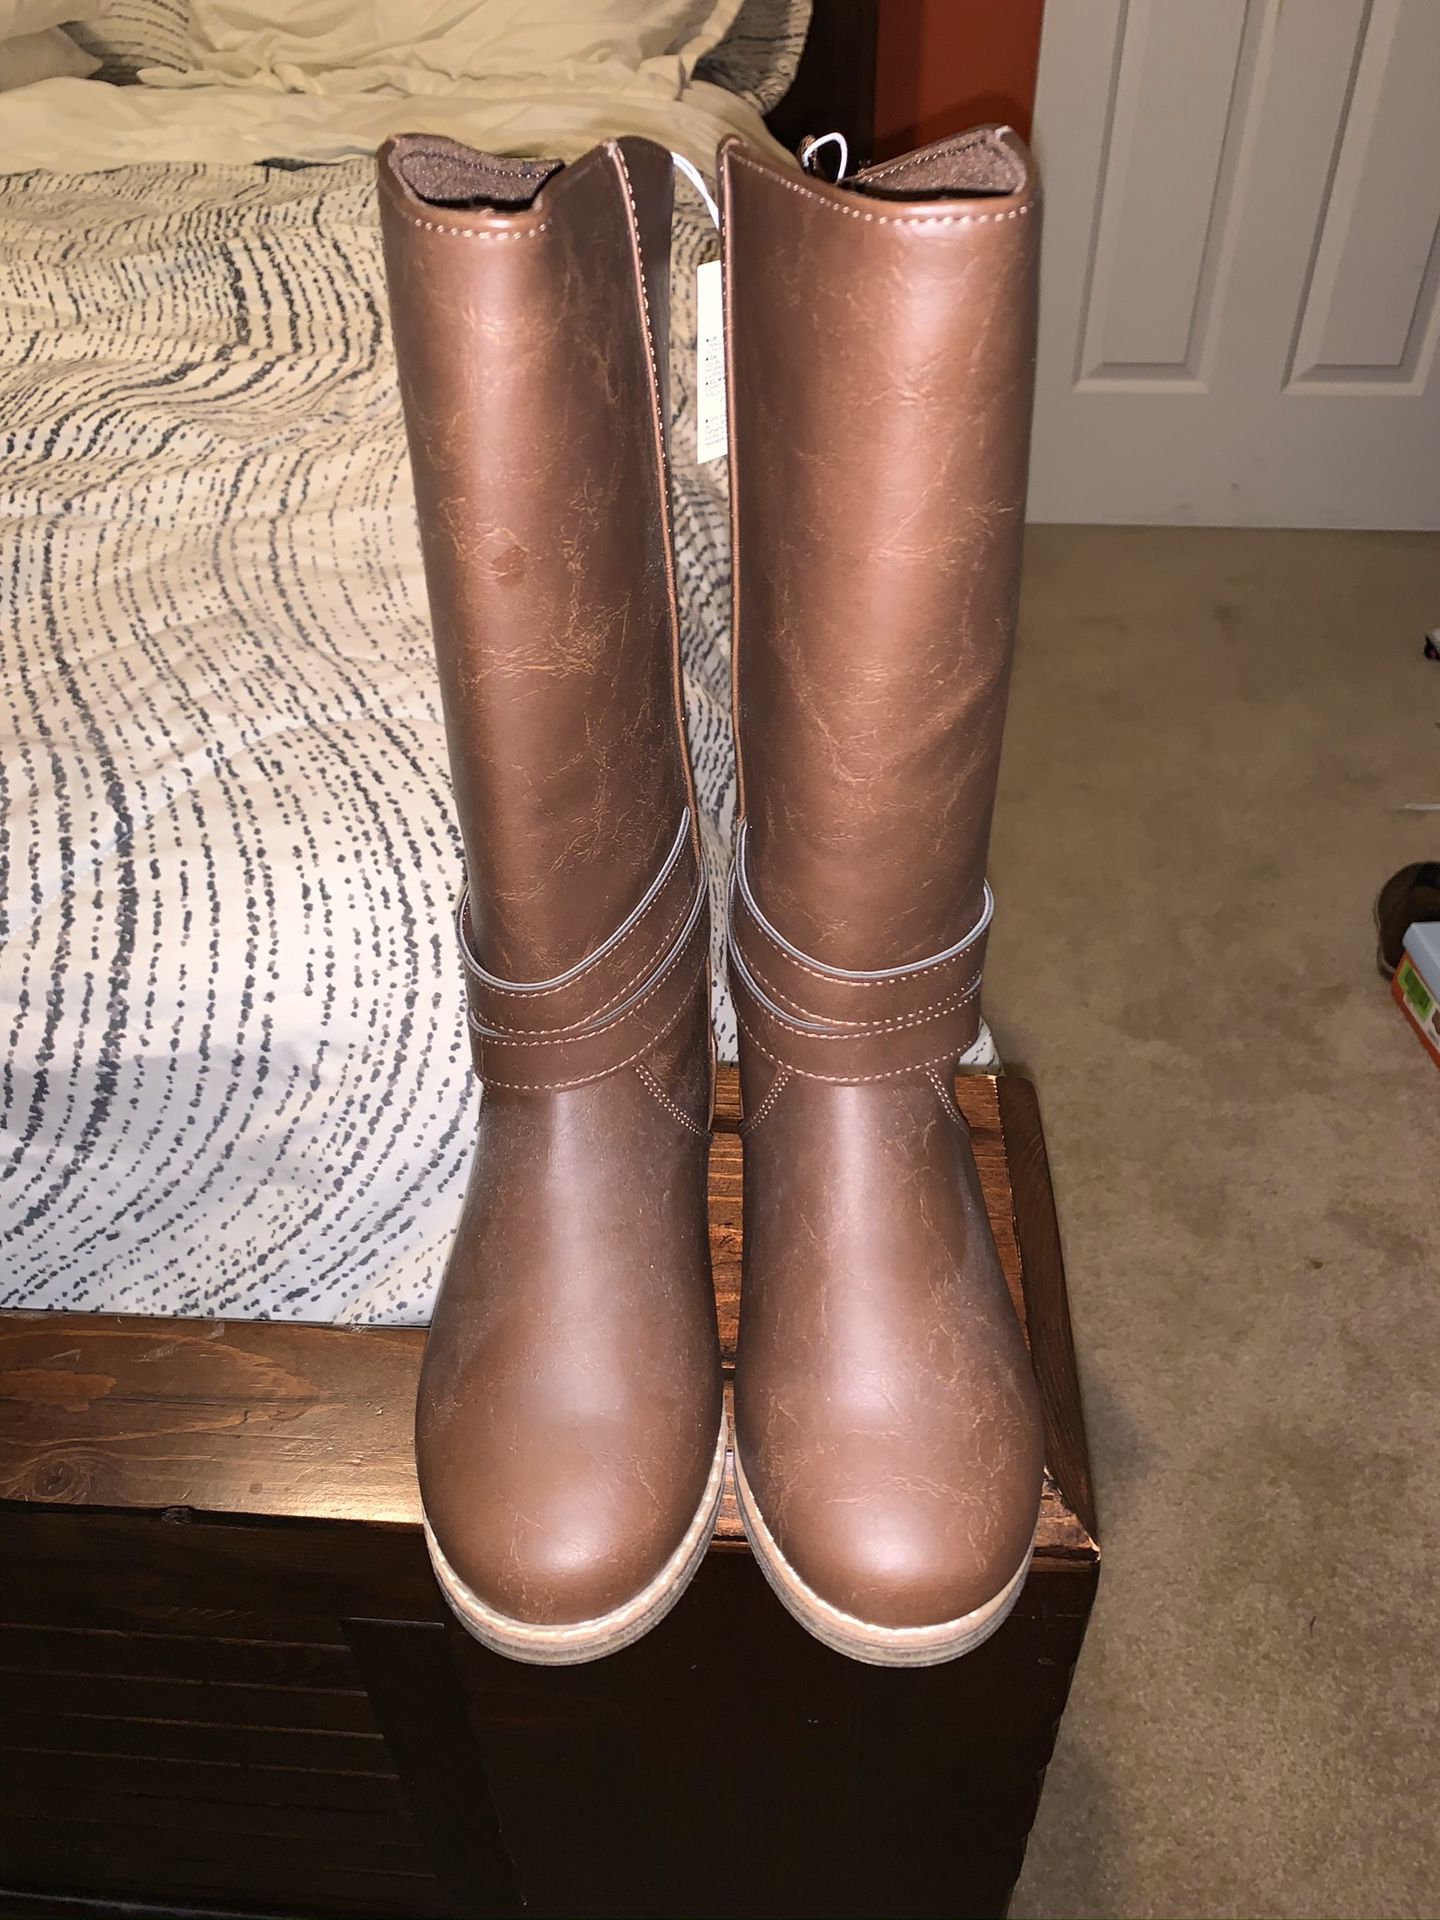 Preschool Girls size 13 boots. New with tags!